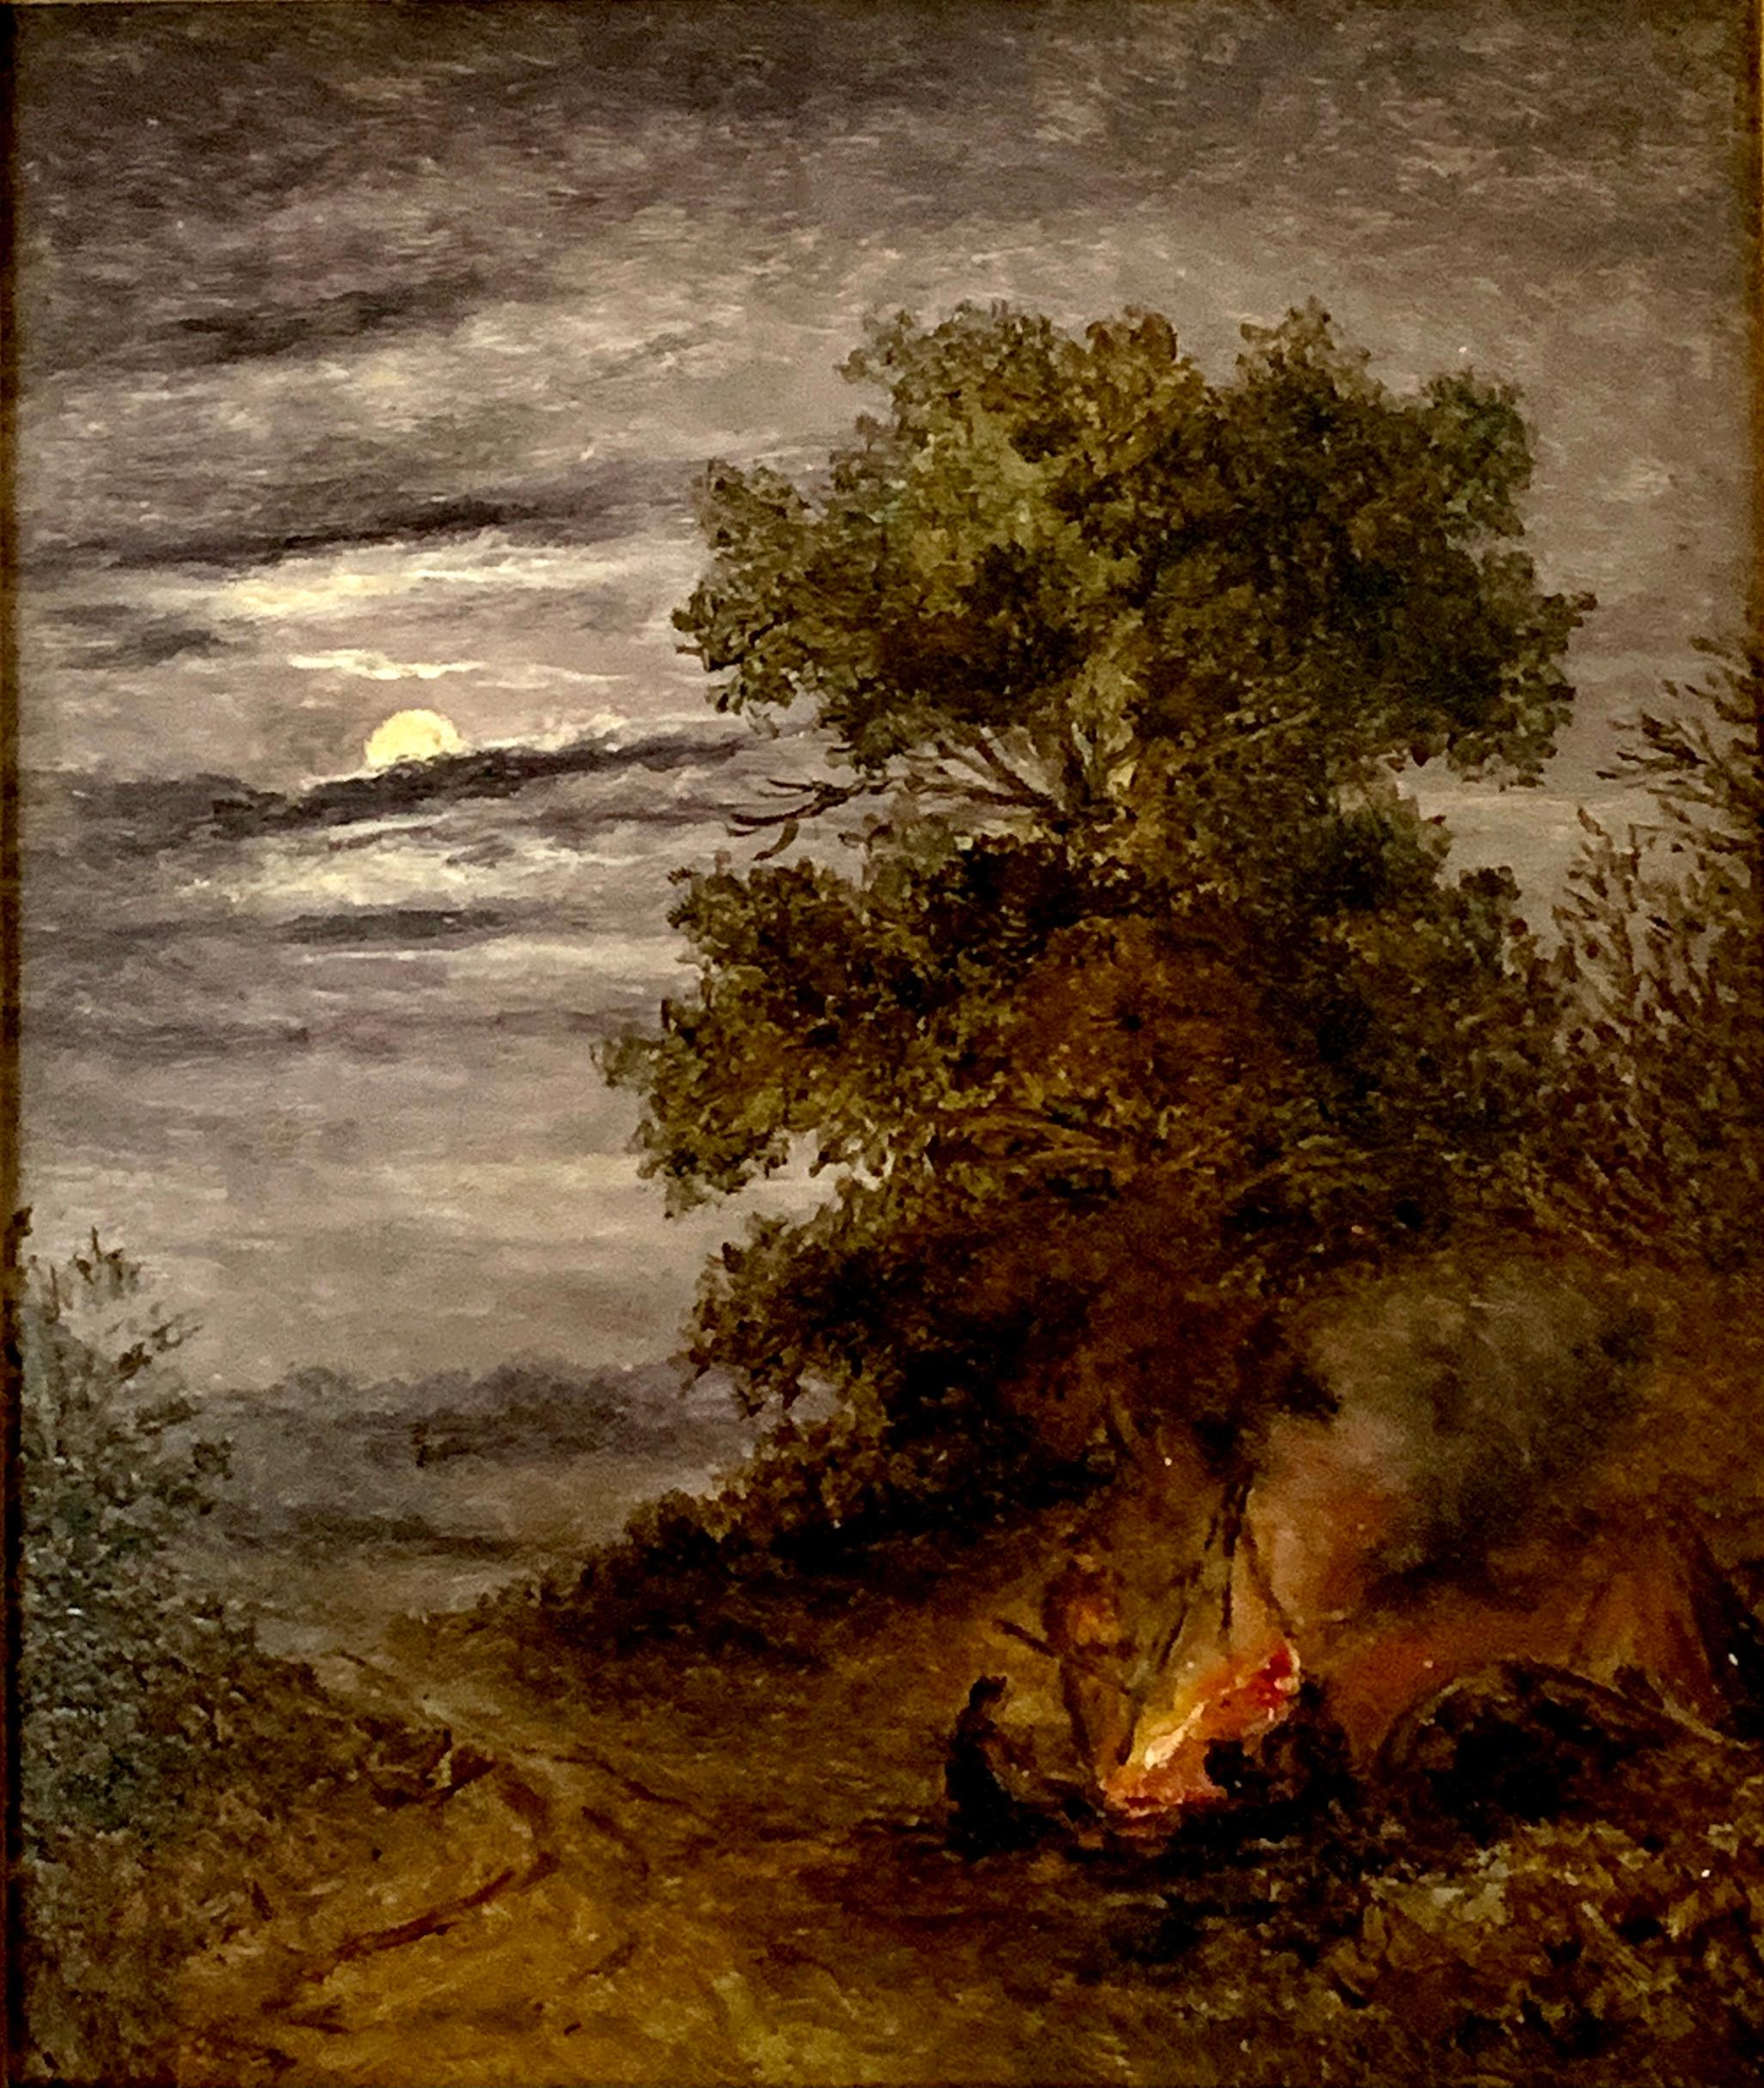 19th century English Moonlight Evening landscape with people by bonfire - Painting by Henry Maurice Page